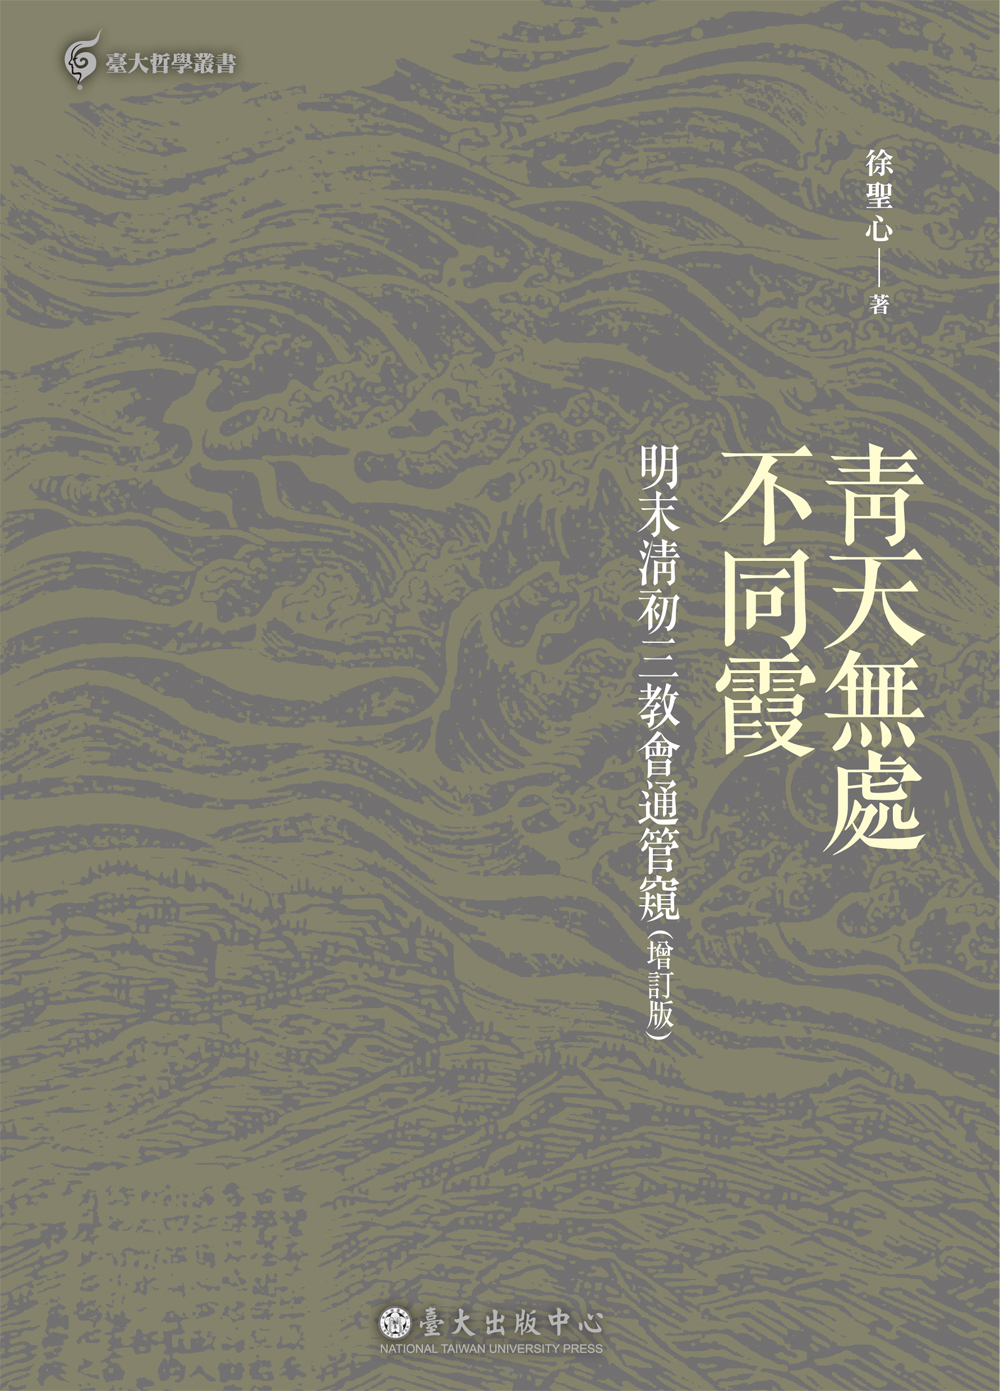 An Overview of the Interpenetration of the Three Teachings in the Late Ming and Early Qing Dynasties(Revised Edition)